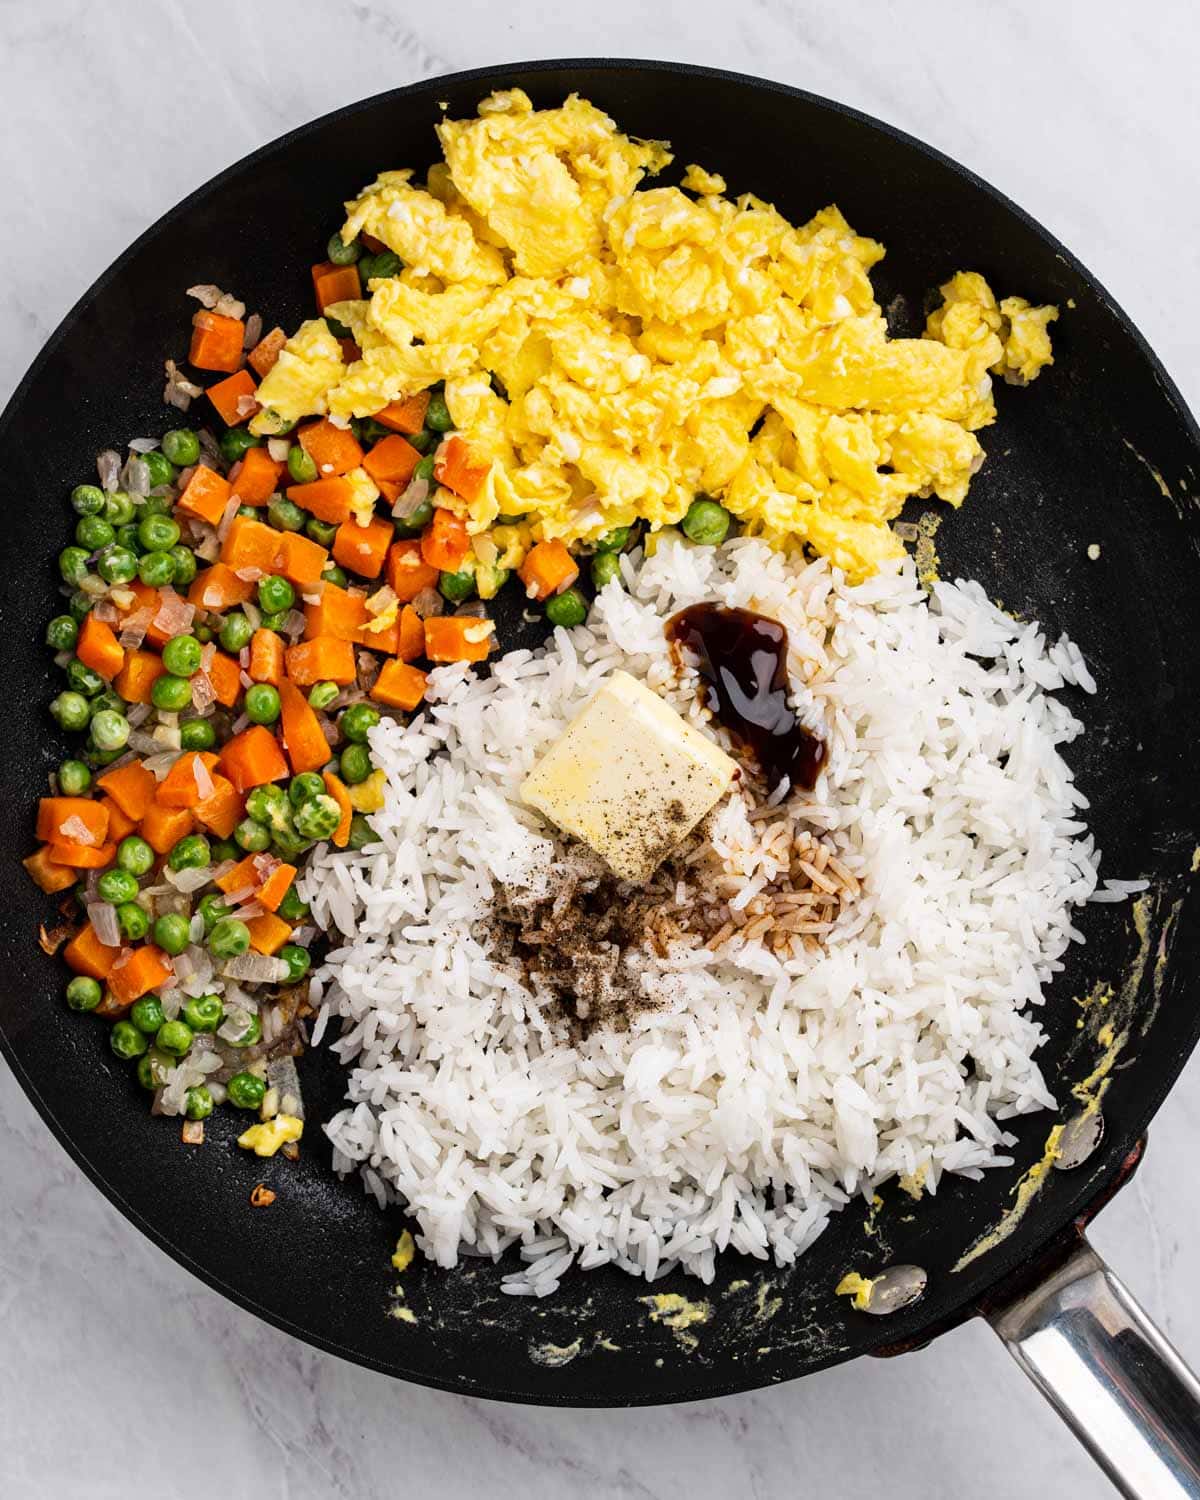 Pan with sautéed vegetables, scrambled eggs, rice, and seasoning.